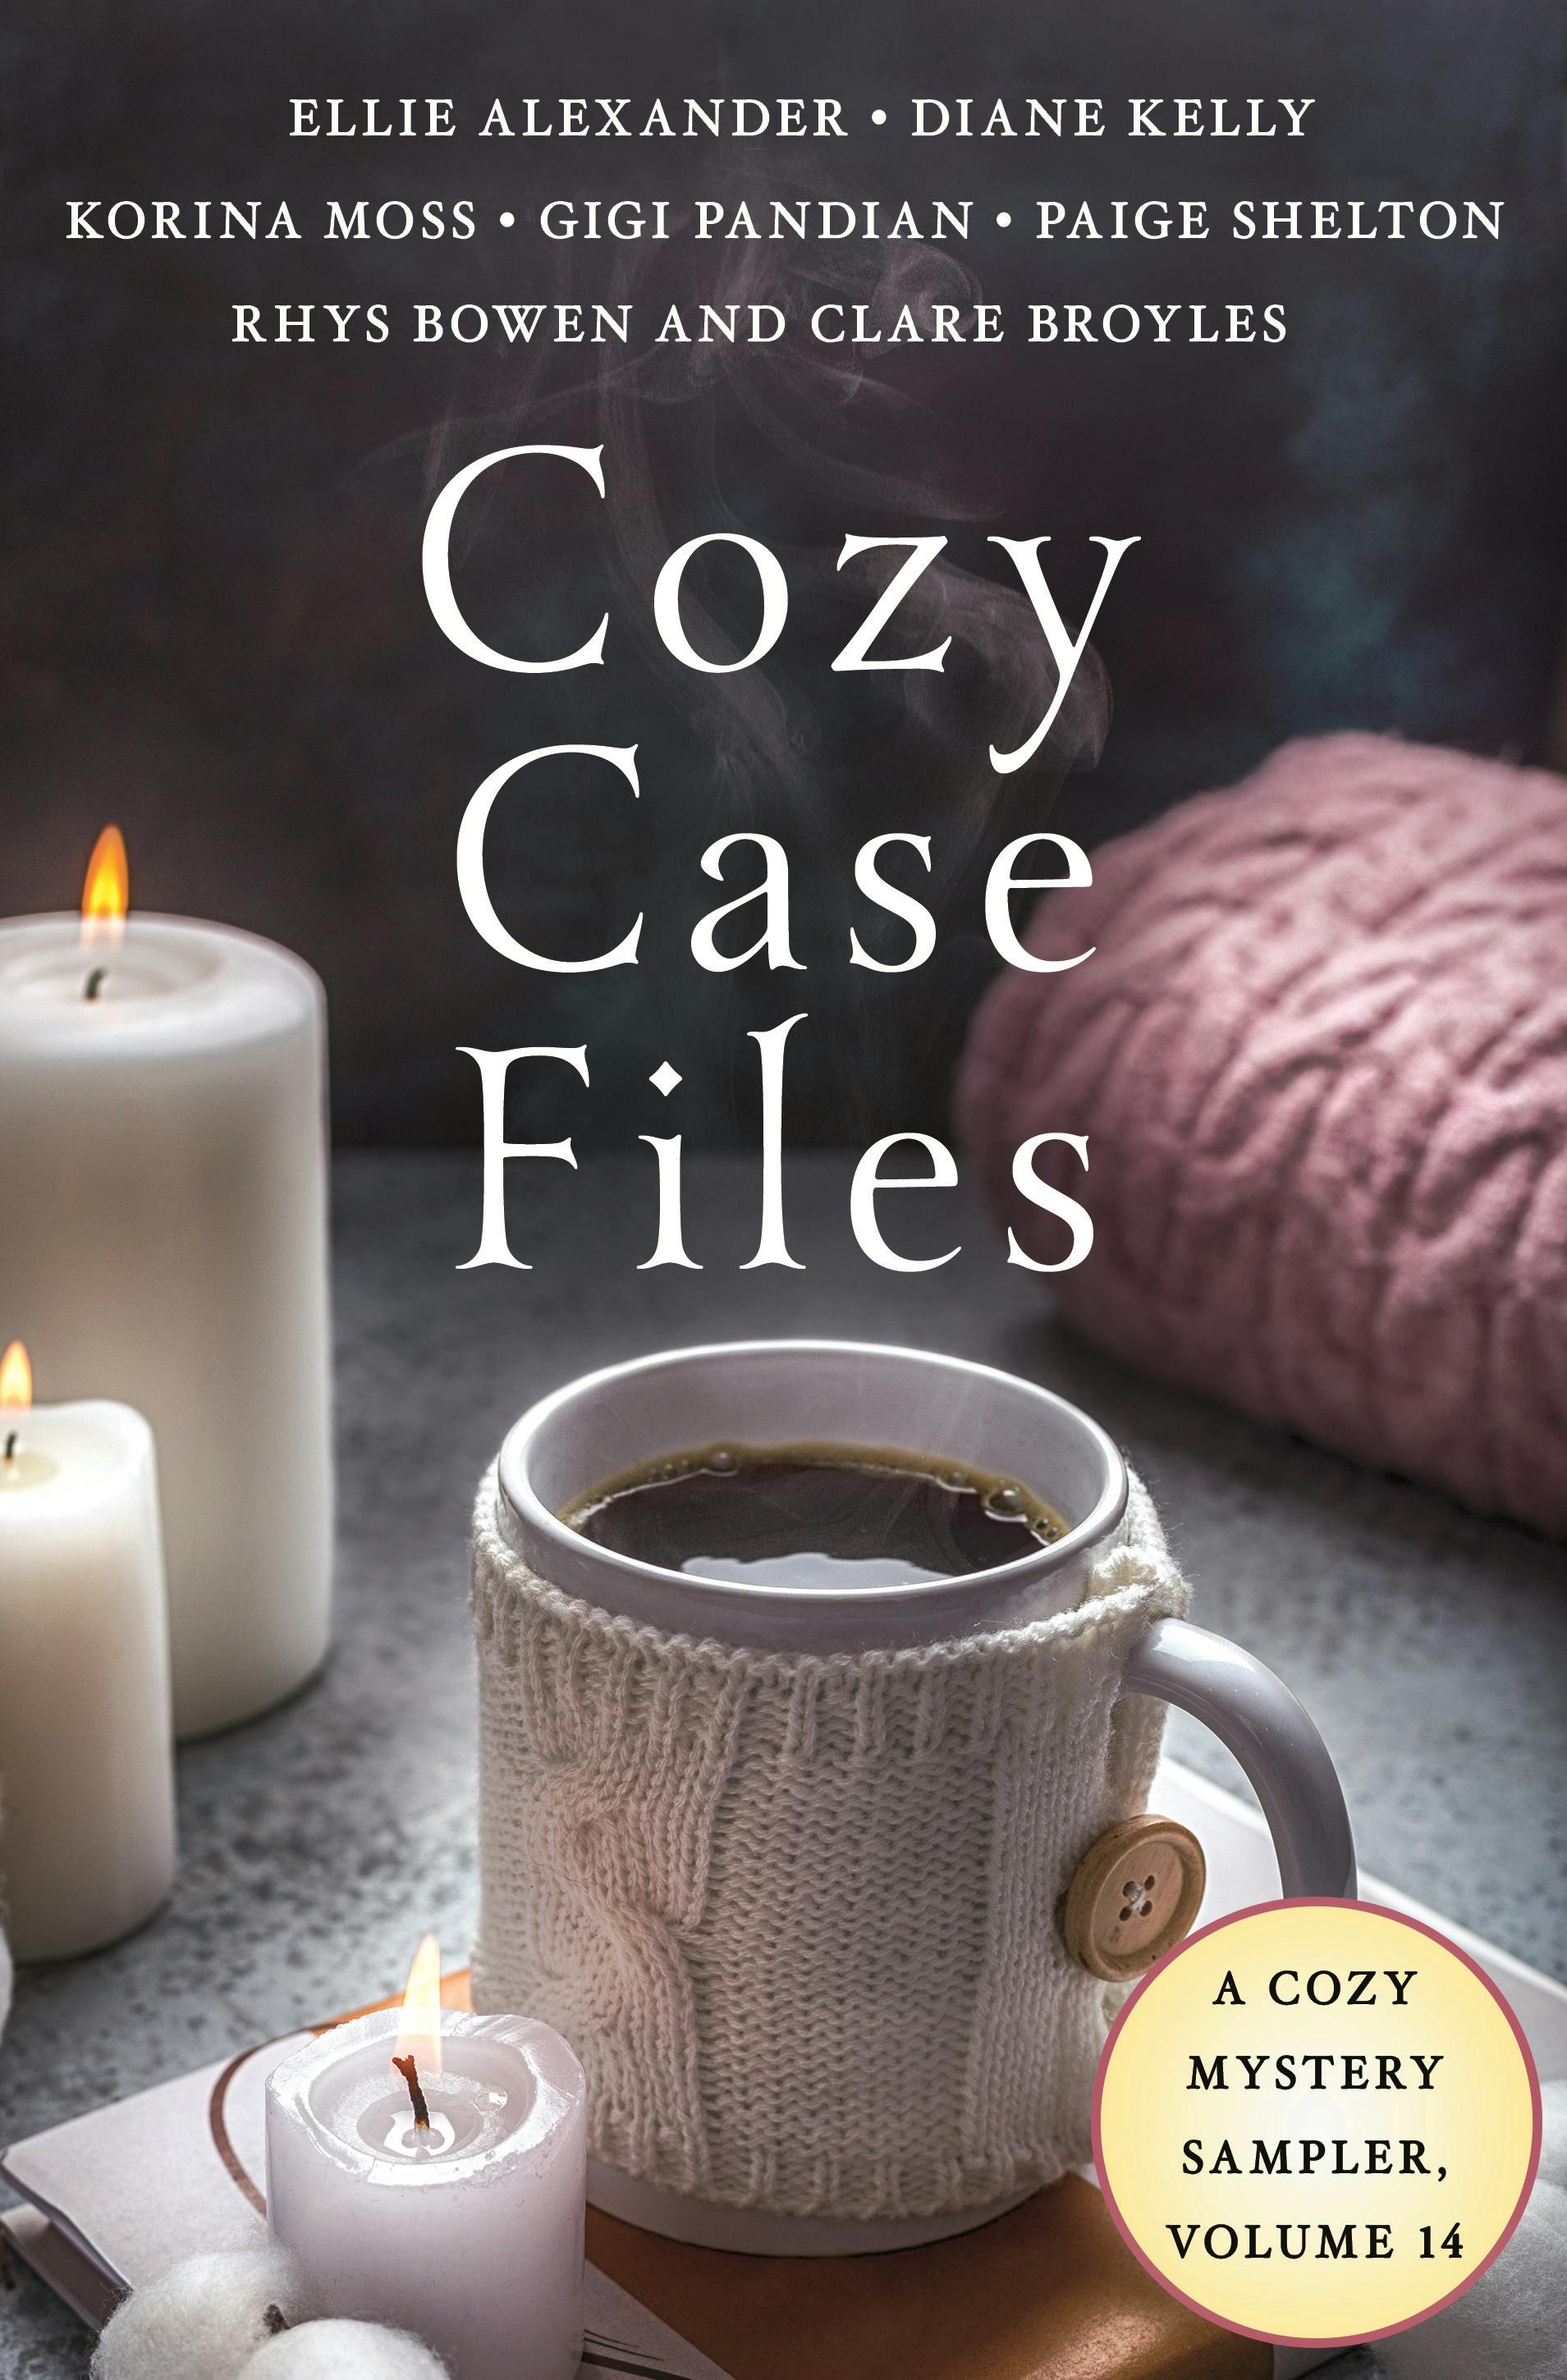 Image of Cozy Case Files, A Cozy Mystery Sampler, Volume 14